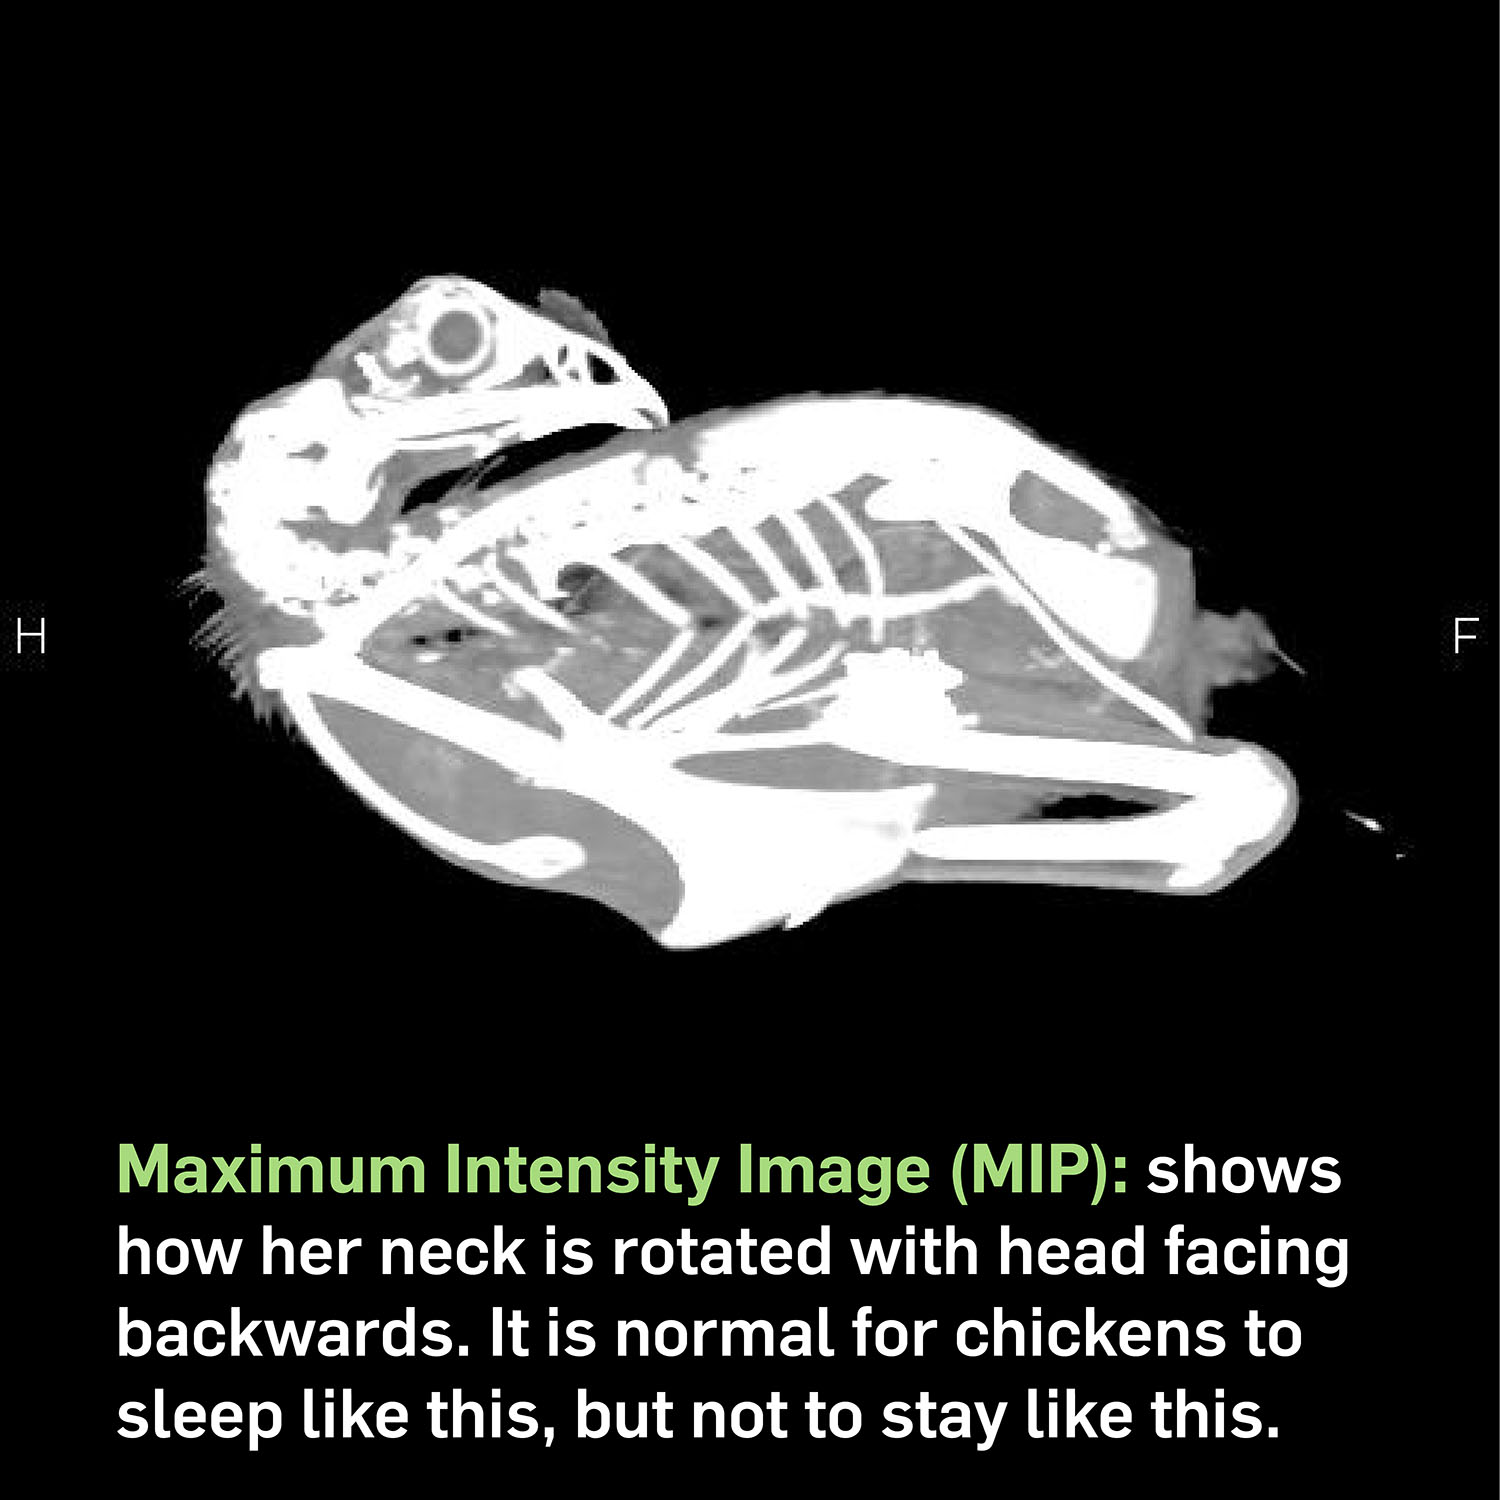 CT Image of a chicken